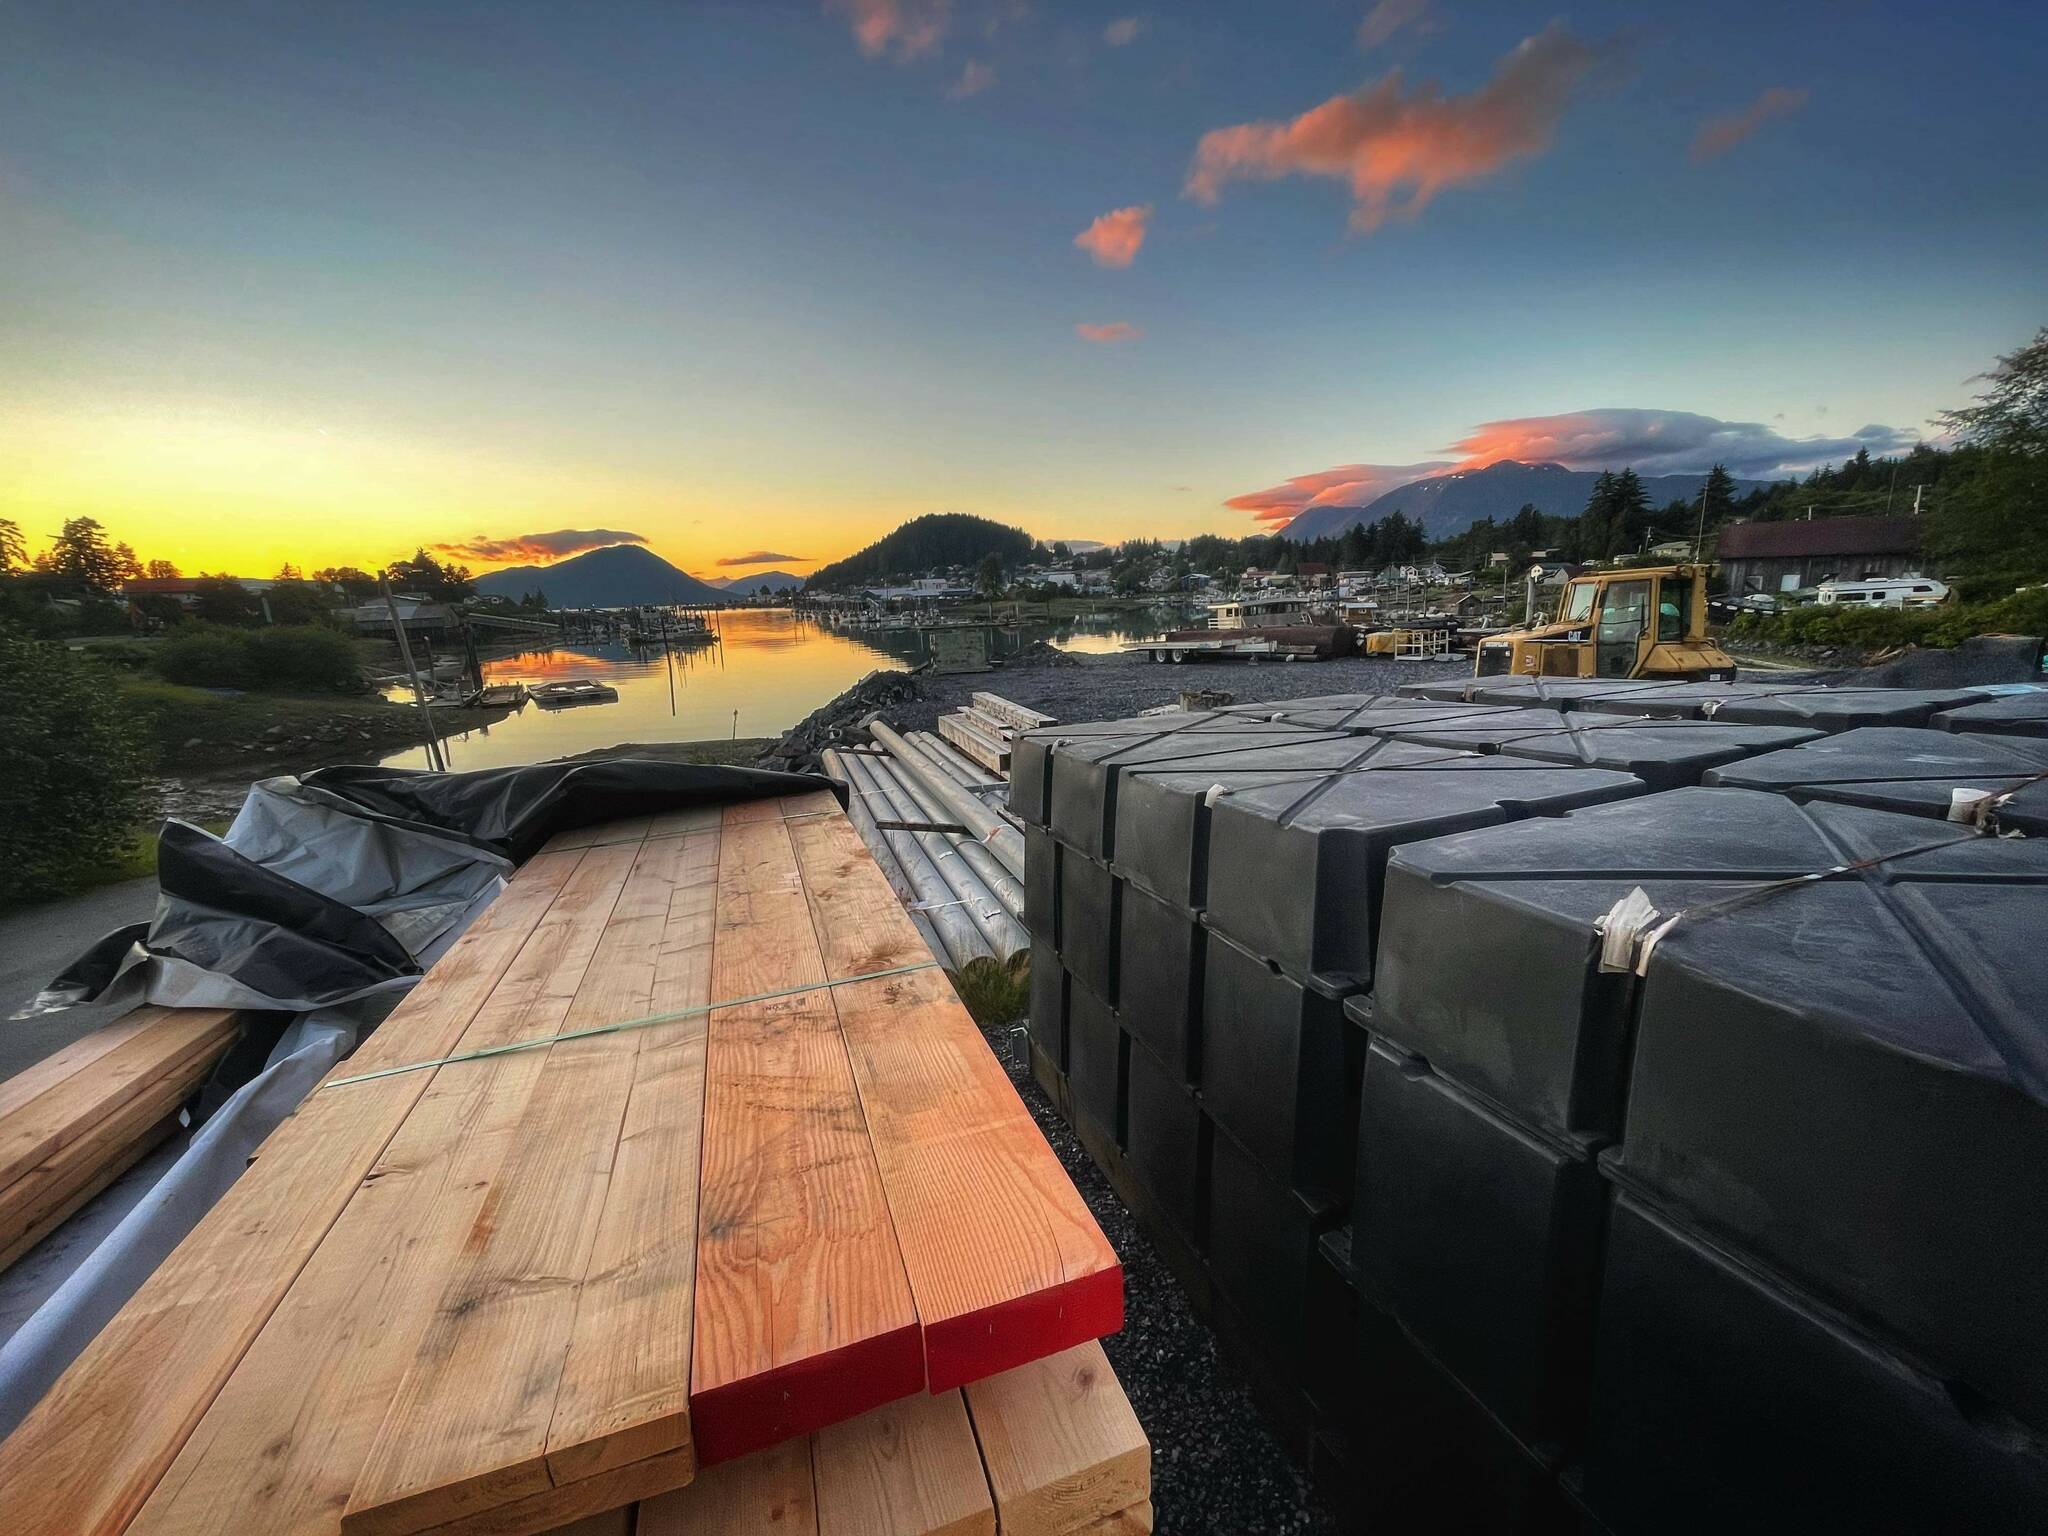 Float house supplies arrive in Wrangell. (Courtesy Photo / Lucy Moline-Robinson)